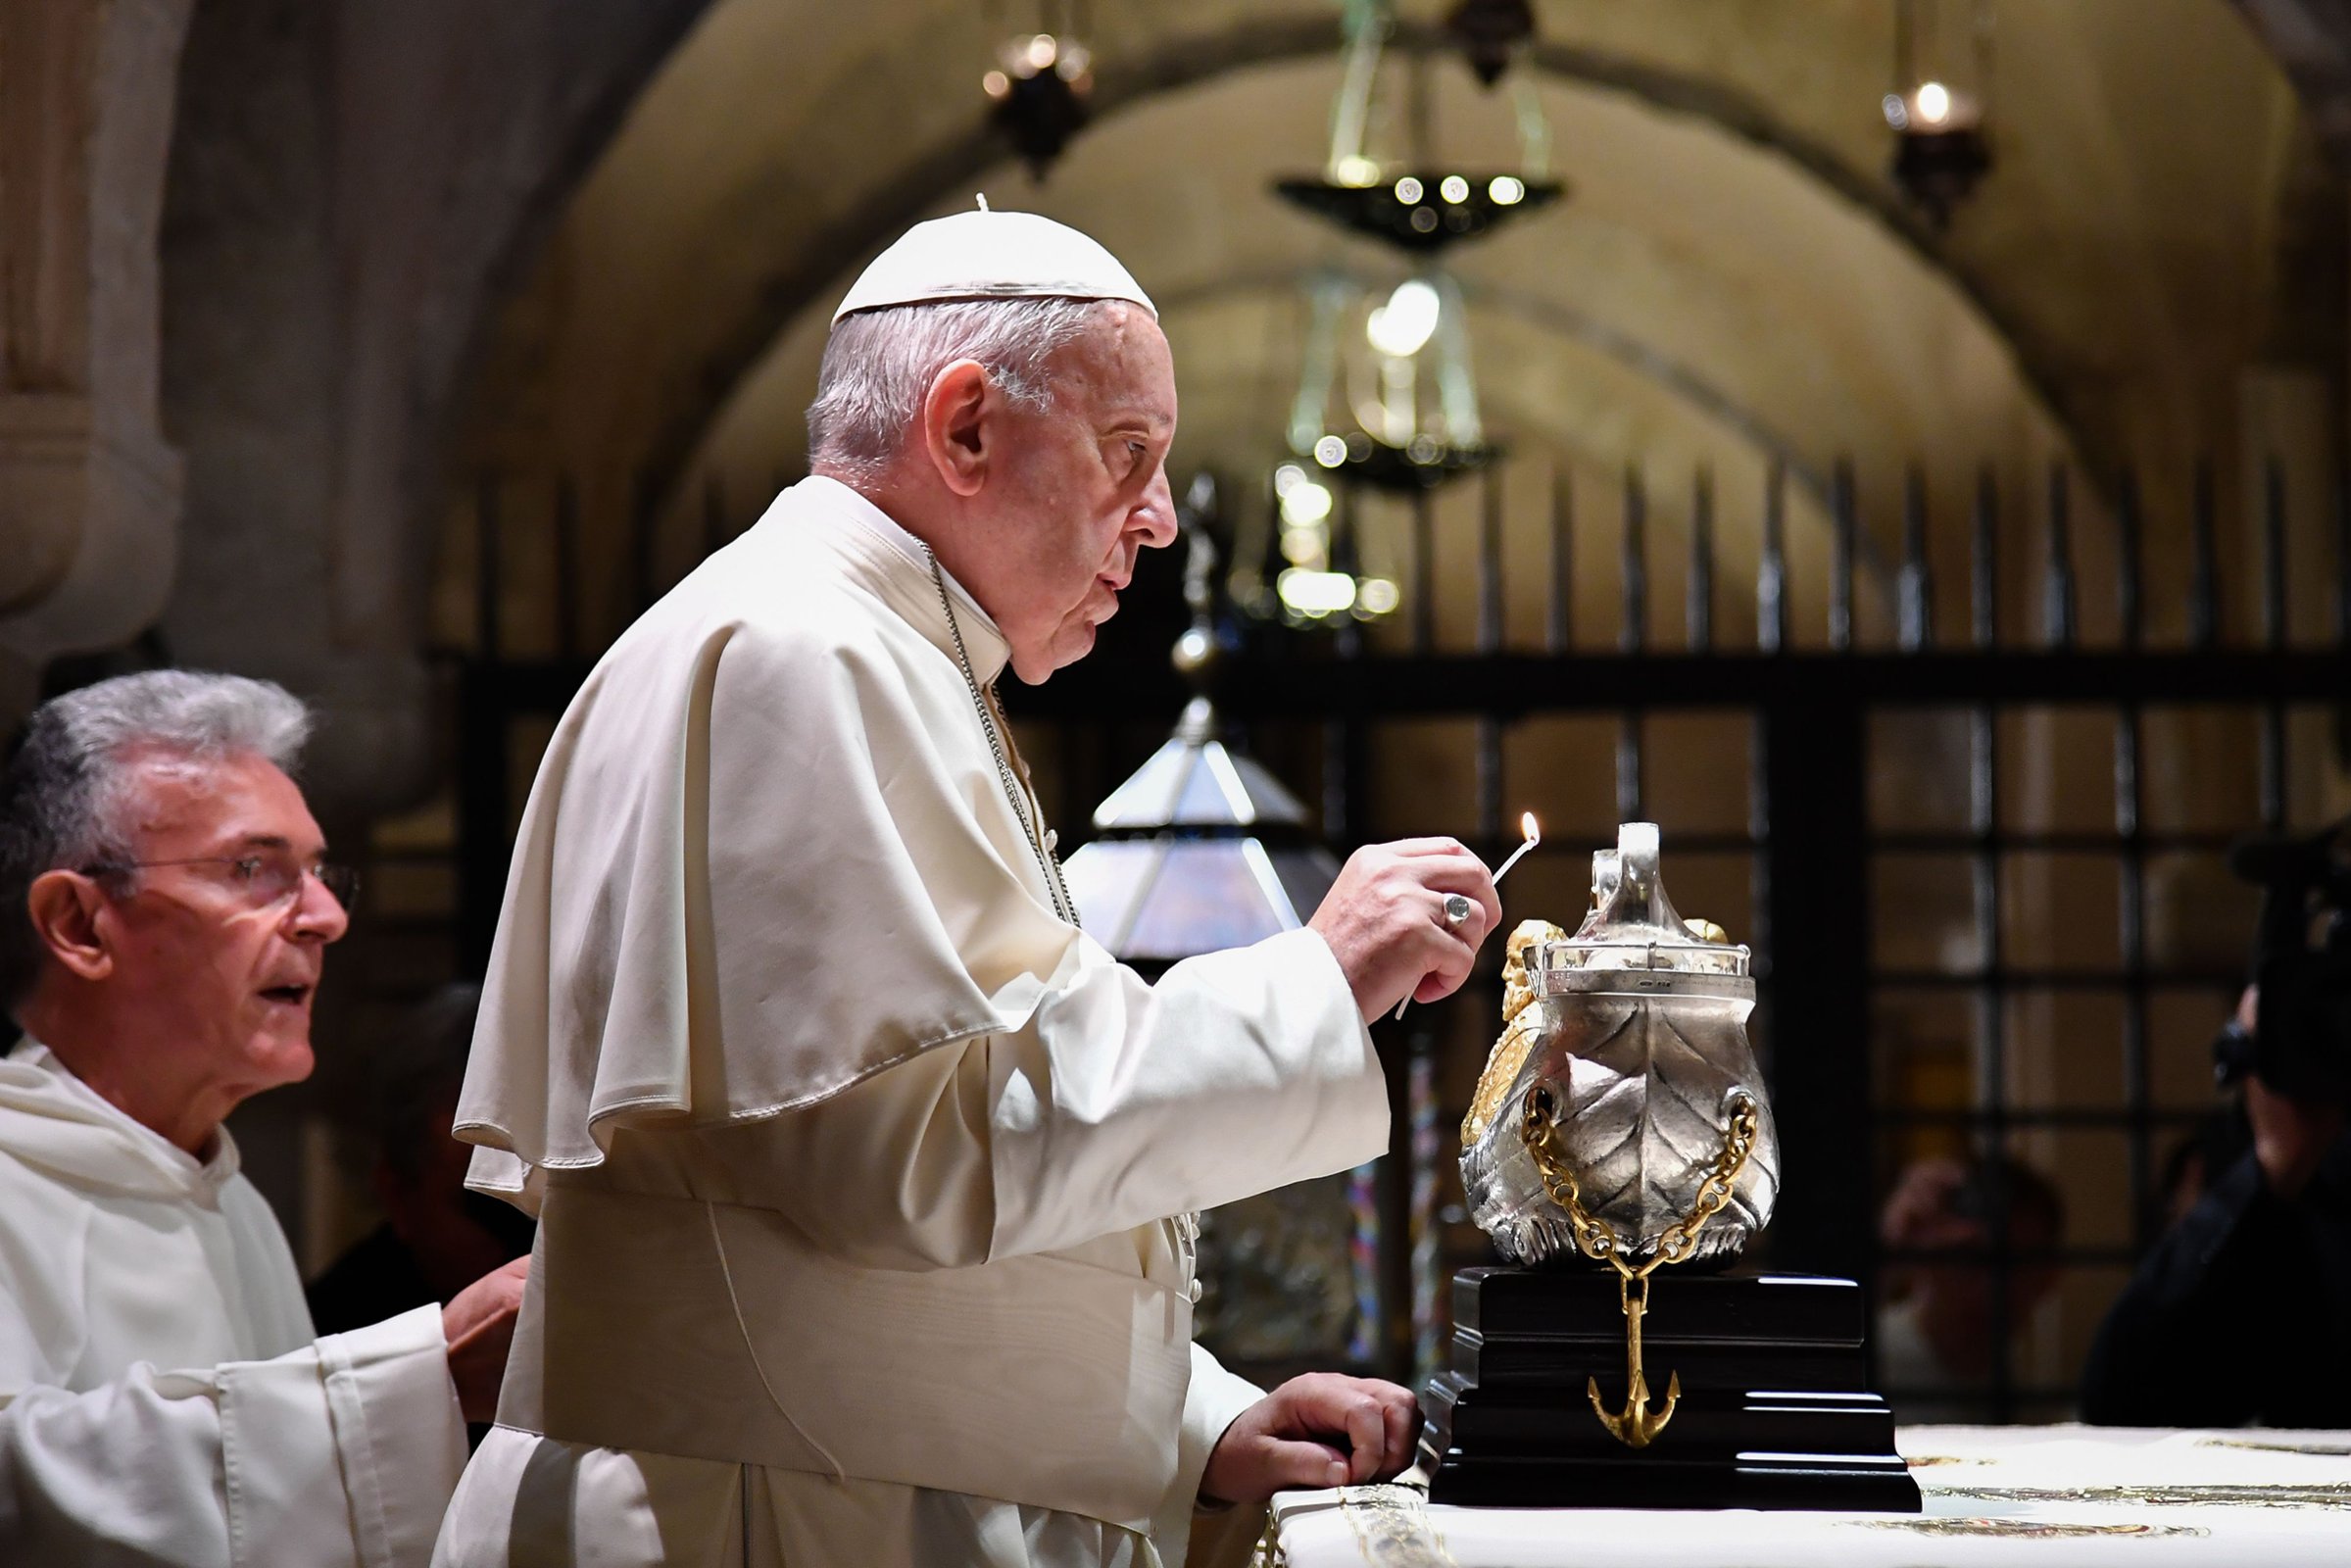 Pope Francis lights the uniflamma lamp at the tomb of Saint Nicholas in Pontifical Basilica of St Nicholas in Bari, Italy, on July 7, 2018.